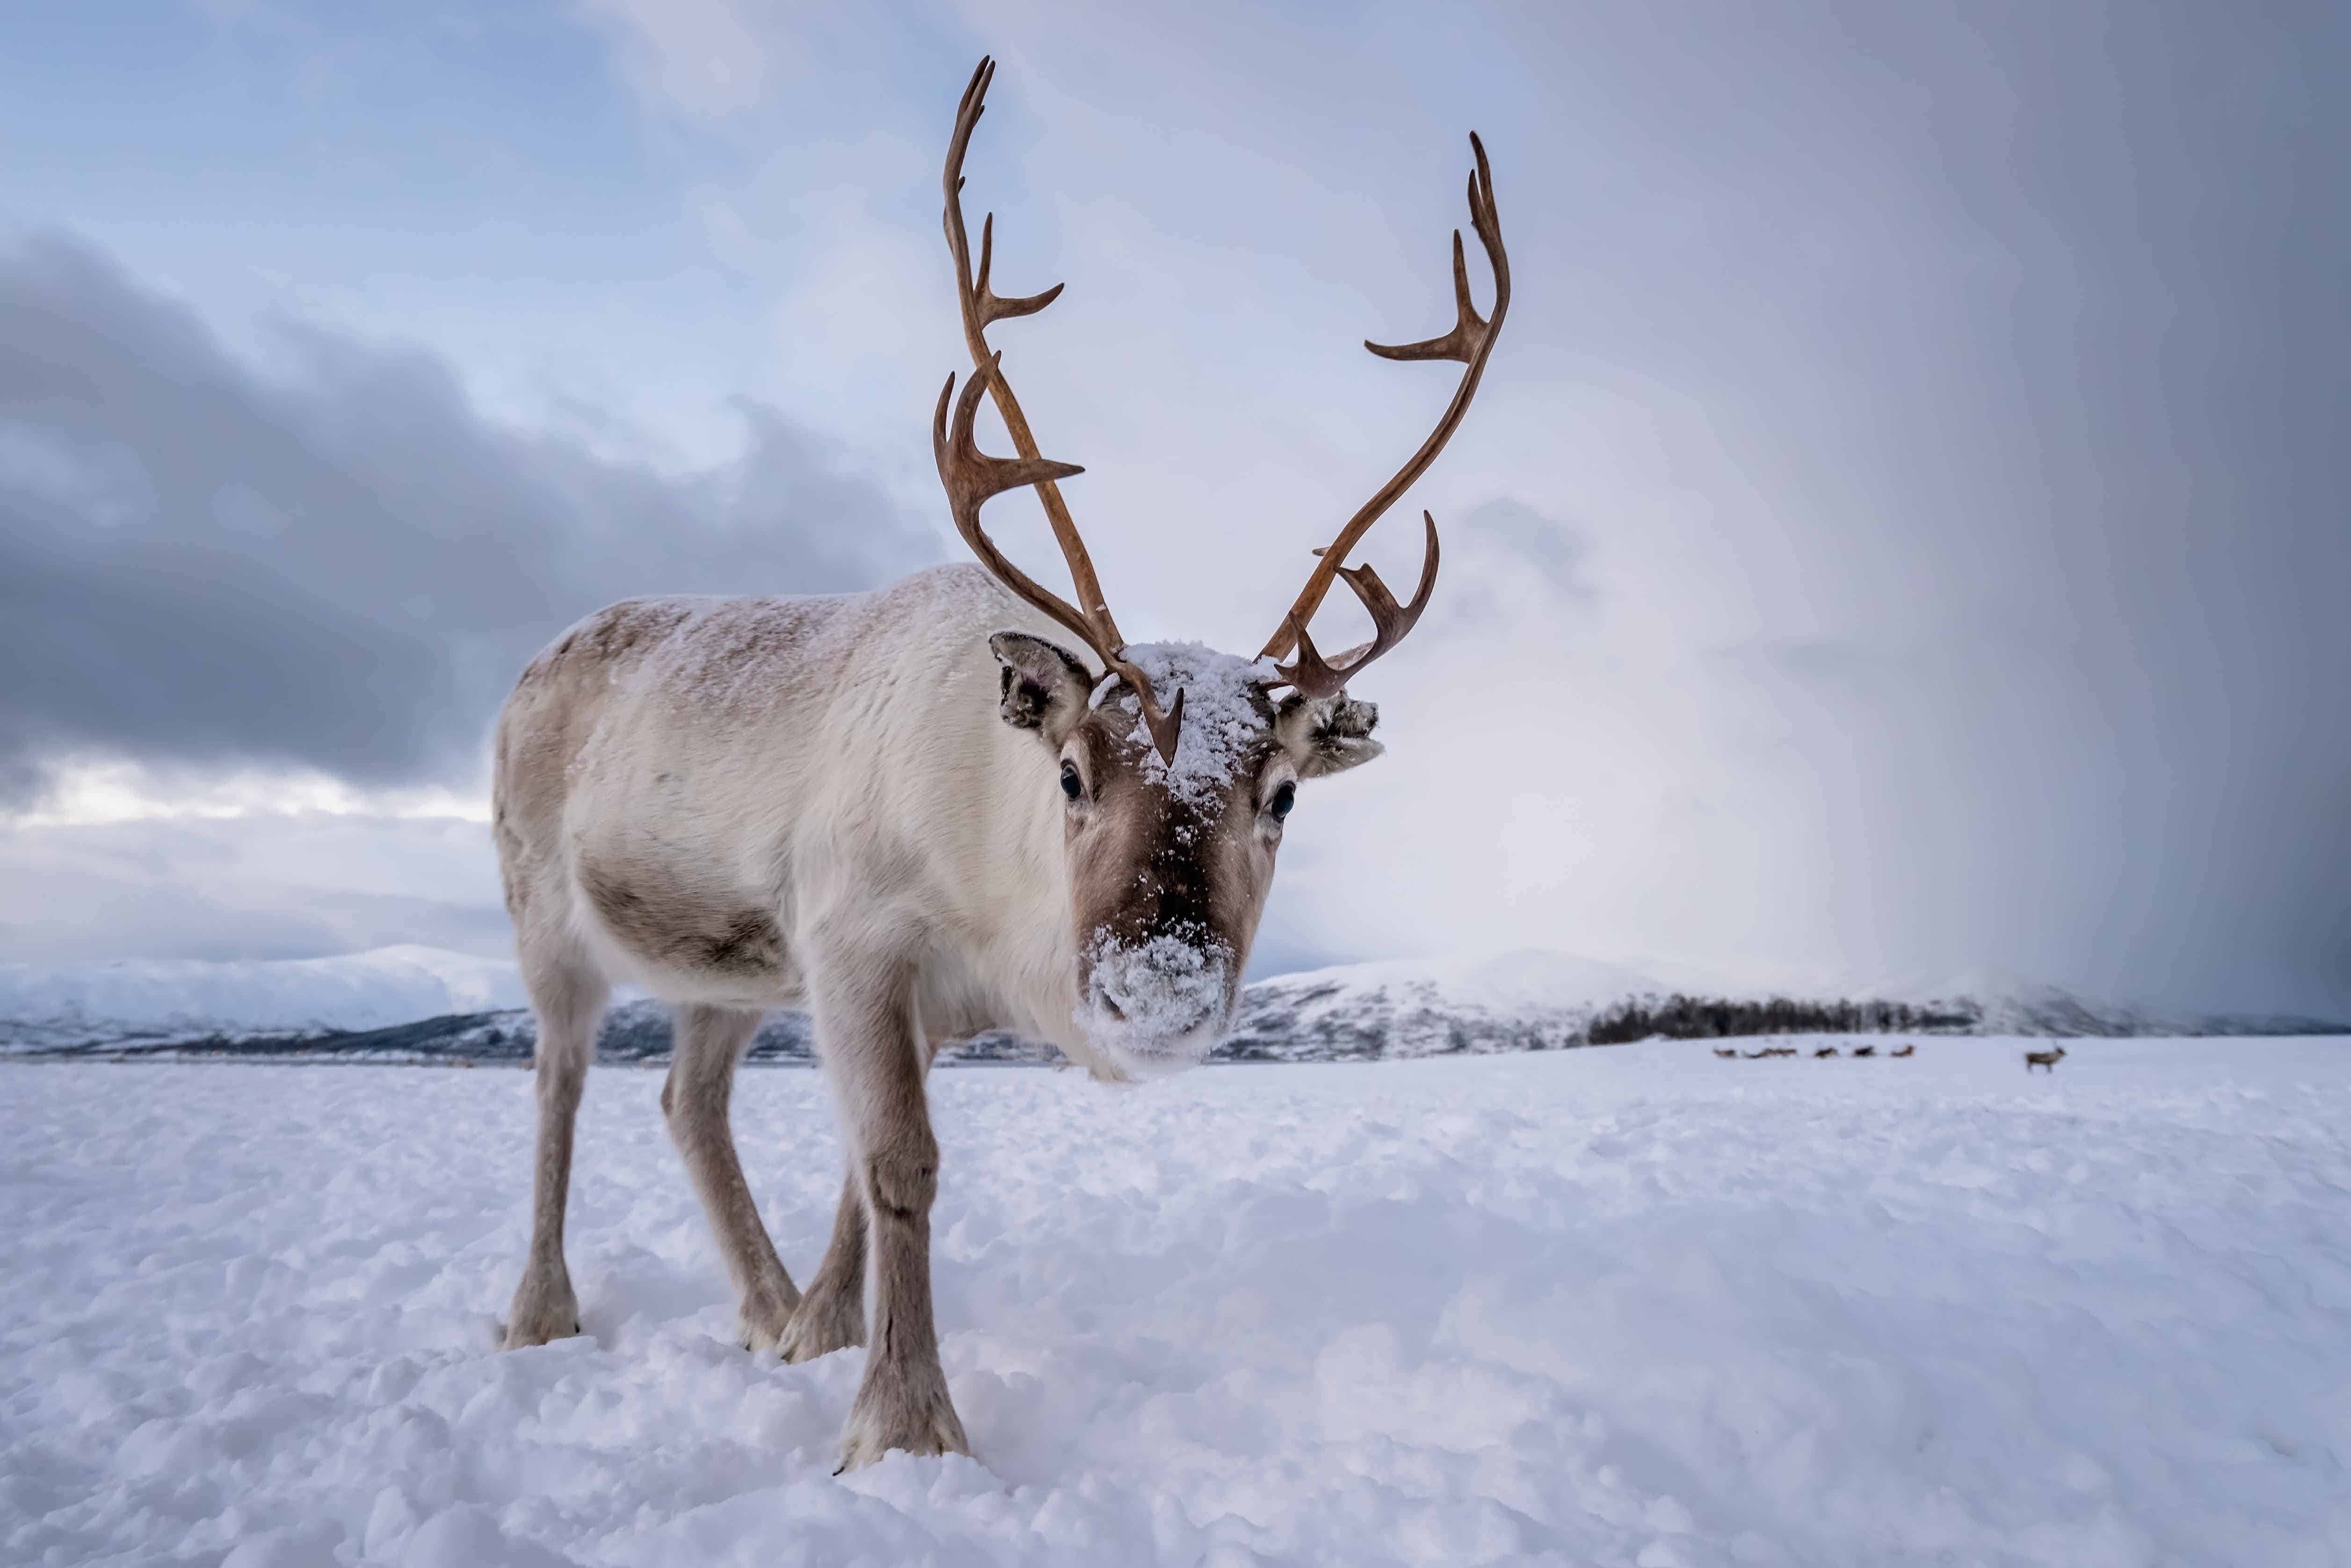 Fun Facts About Reindeer Antlers